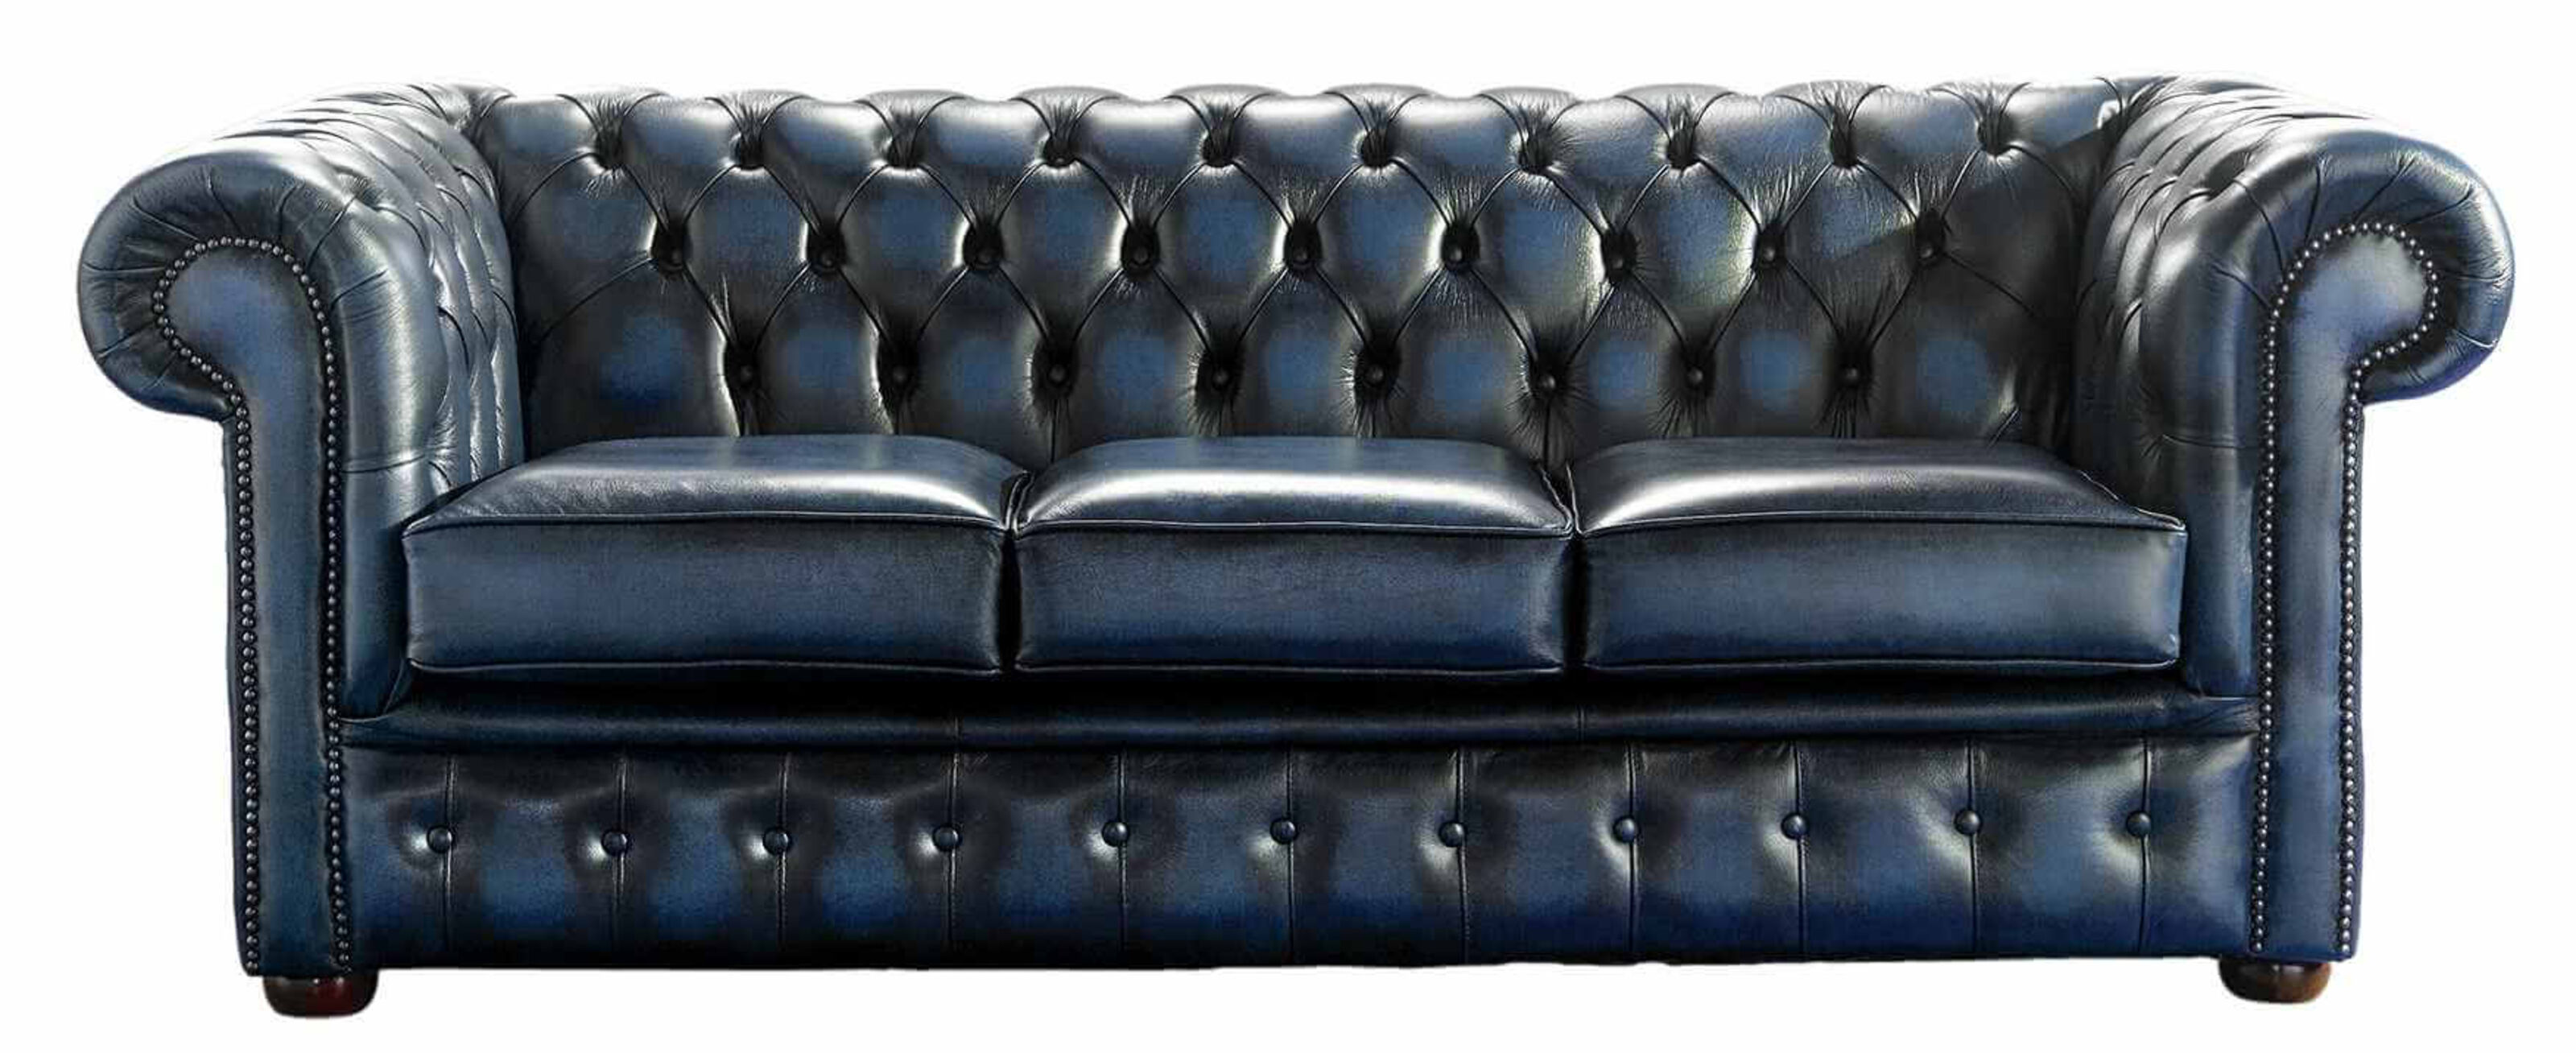 Discover the Magic of a Leather Chesterfield Sofa  %Post Title